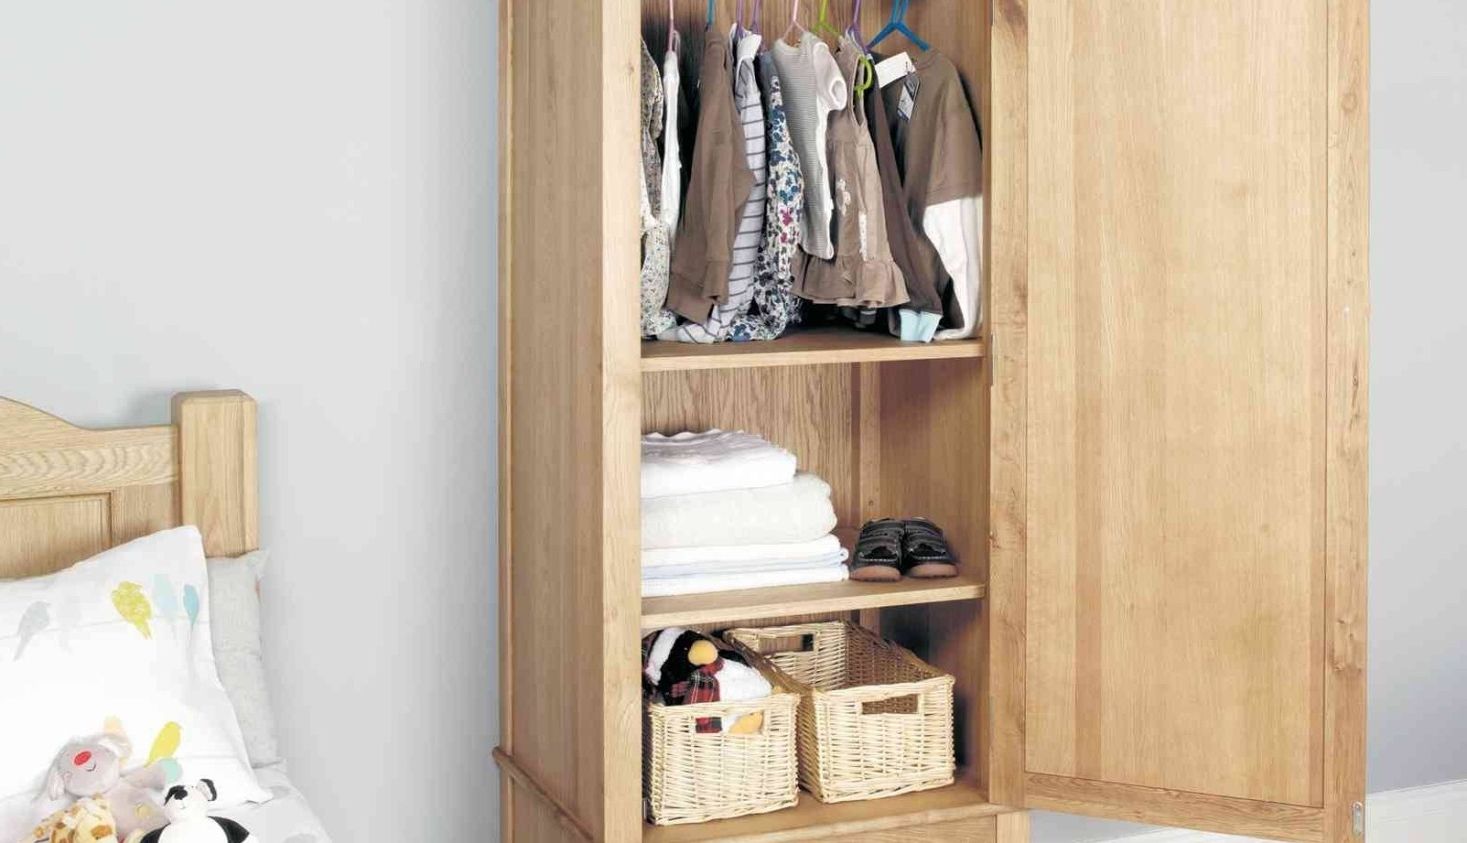 Tall Double Hanging Rail Wardrobes With Widely Used Shelf : Wardrobe Hanging Rail Stunning Double Hanging Rail (View 3 of 15)